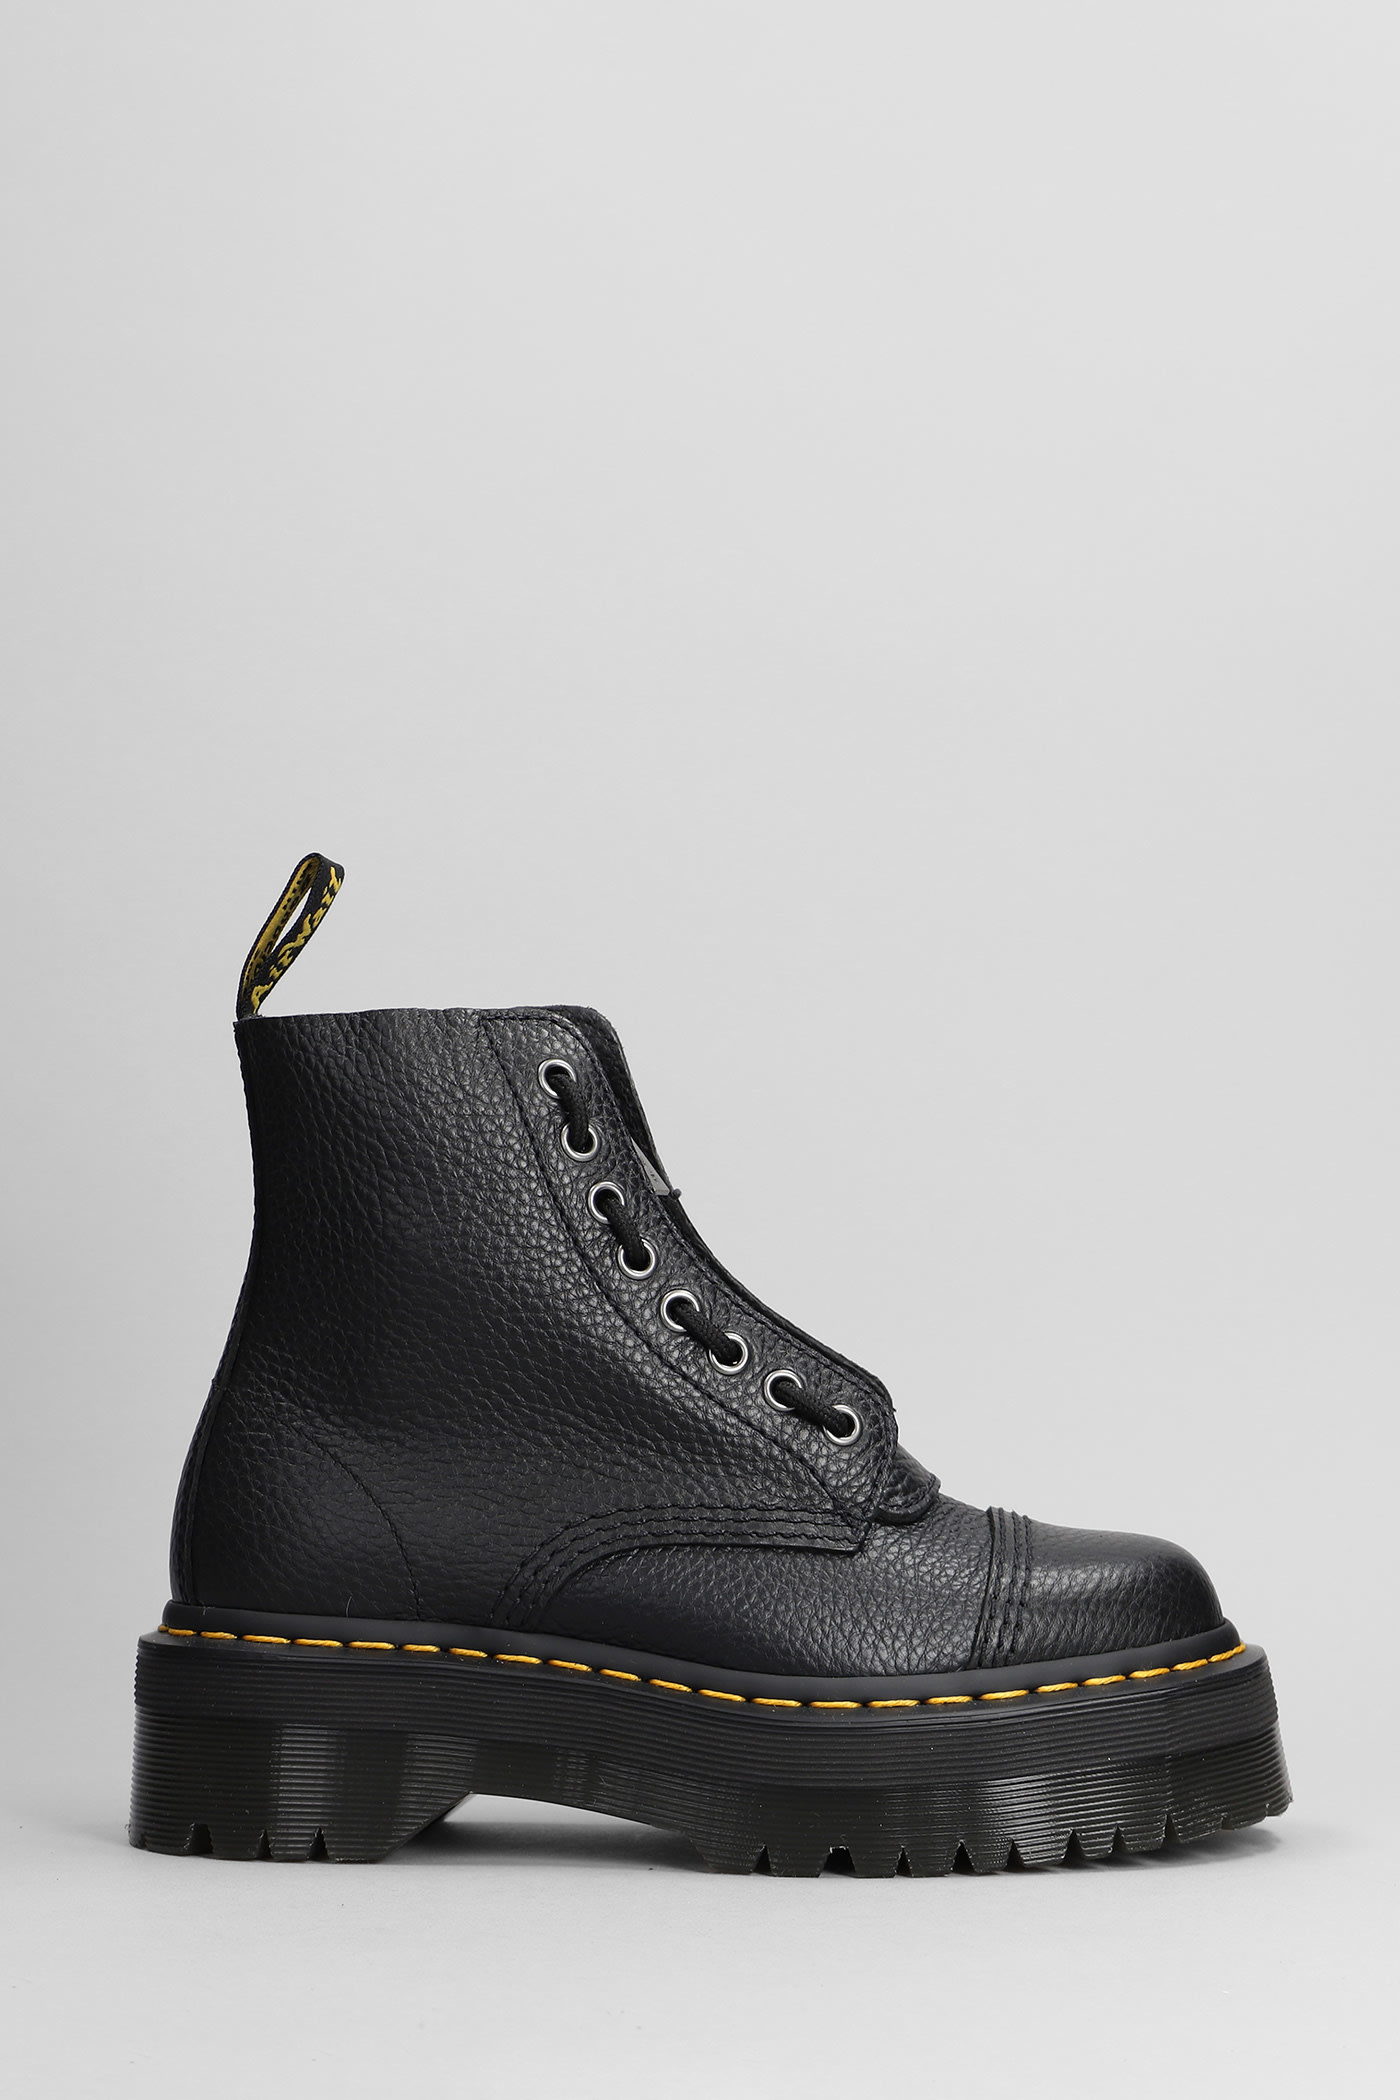 Dr. Martens Sinclair Combat Boots In Black Leather